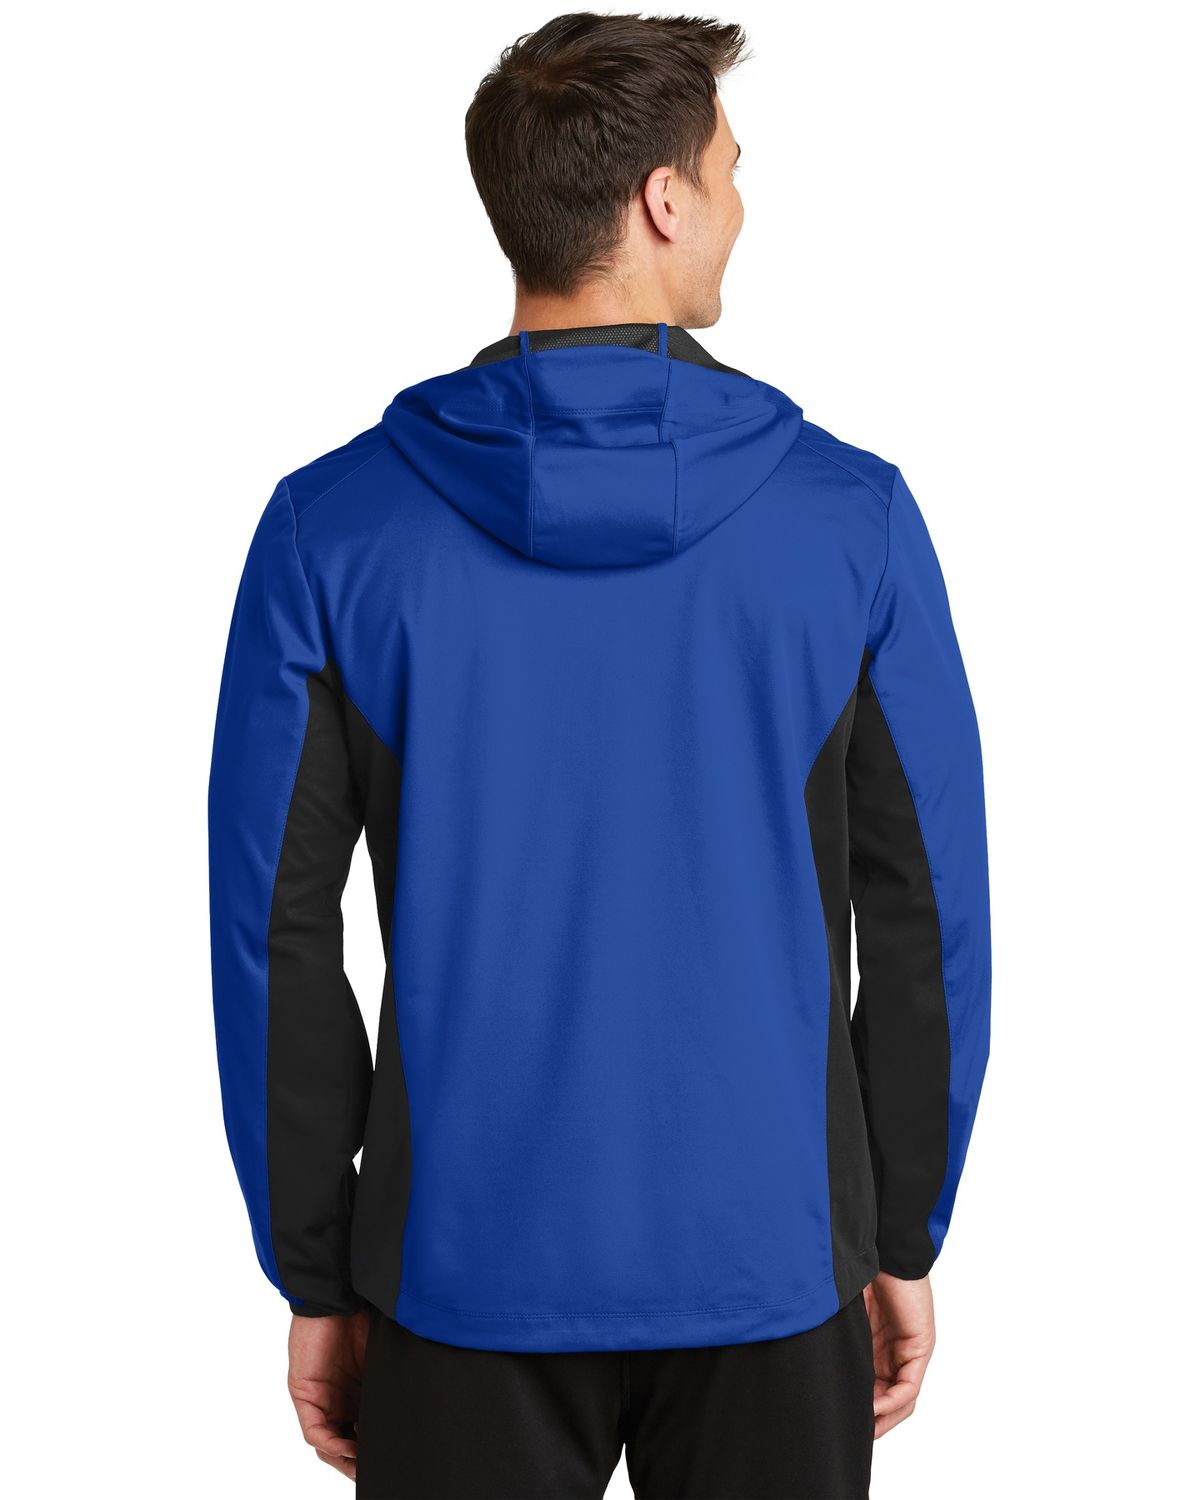 'Port Authority J719 Active Hooded Soft Shell Jacket'